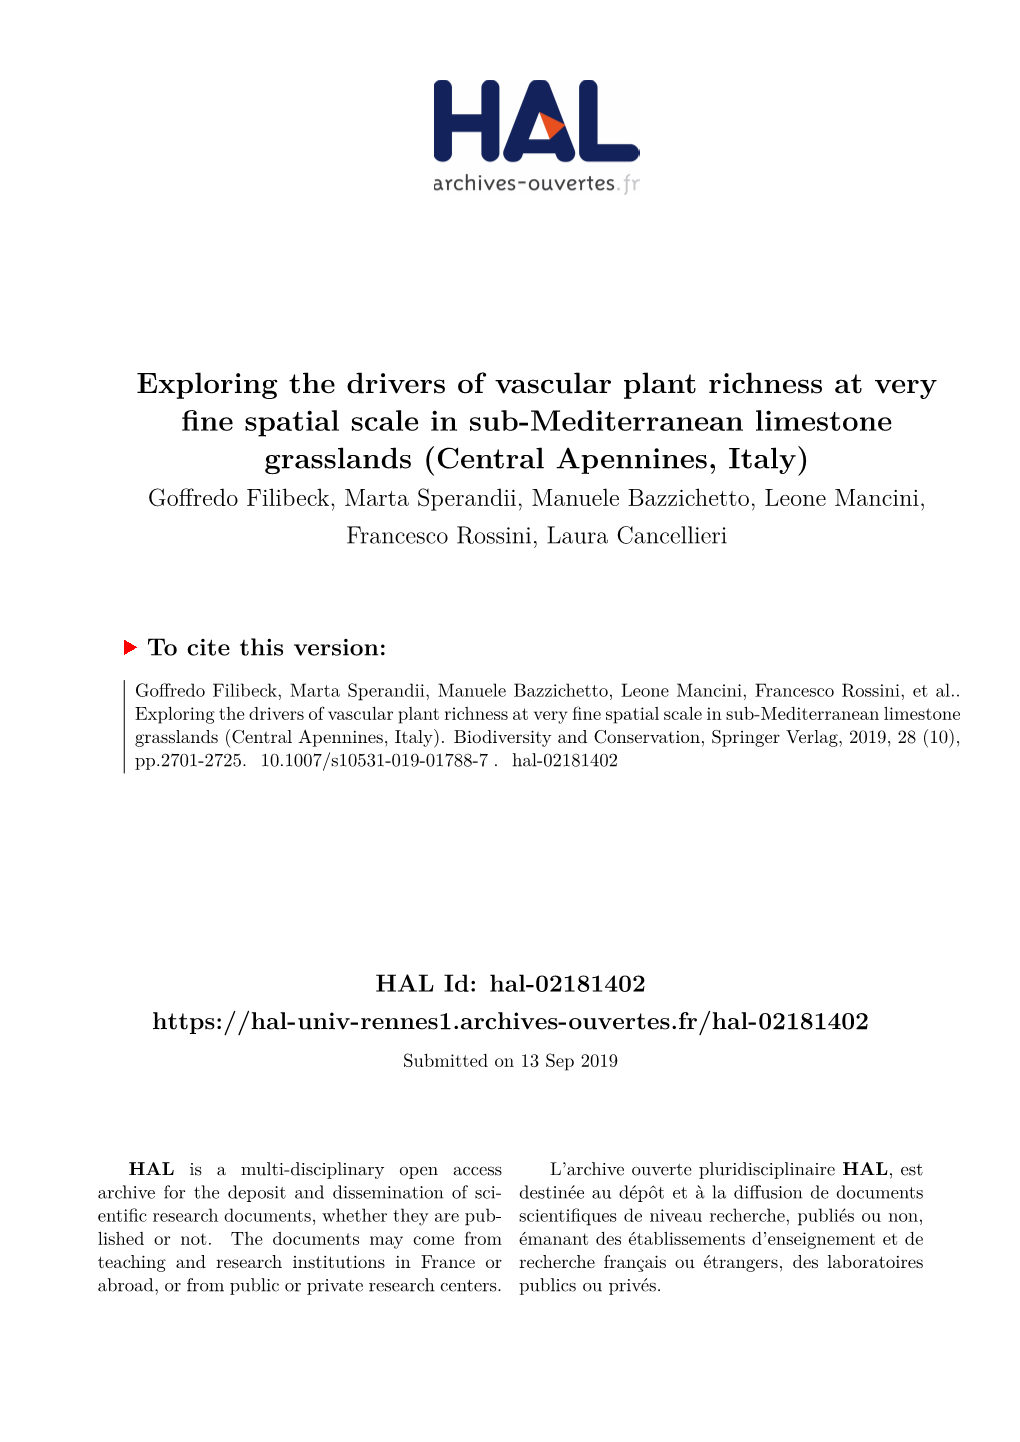 Exploring the Drivers of Vascular Plant Richness at Very